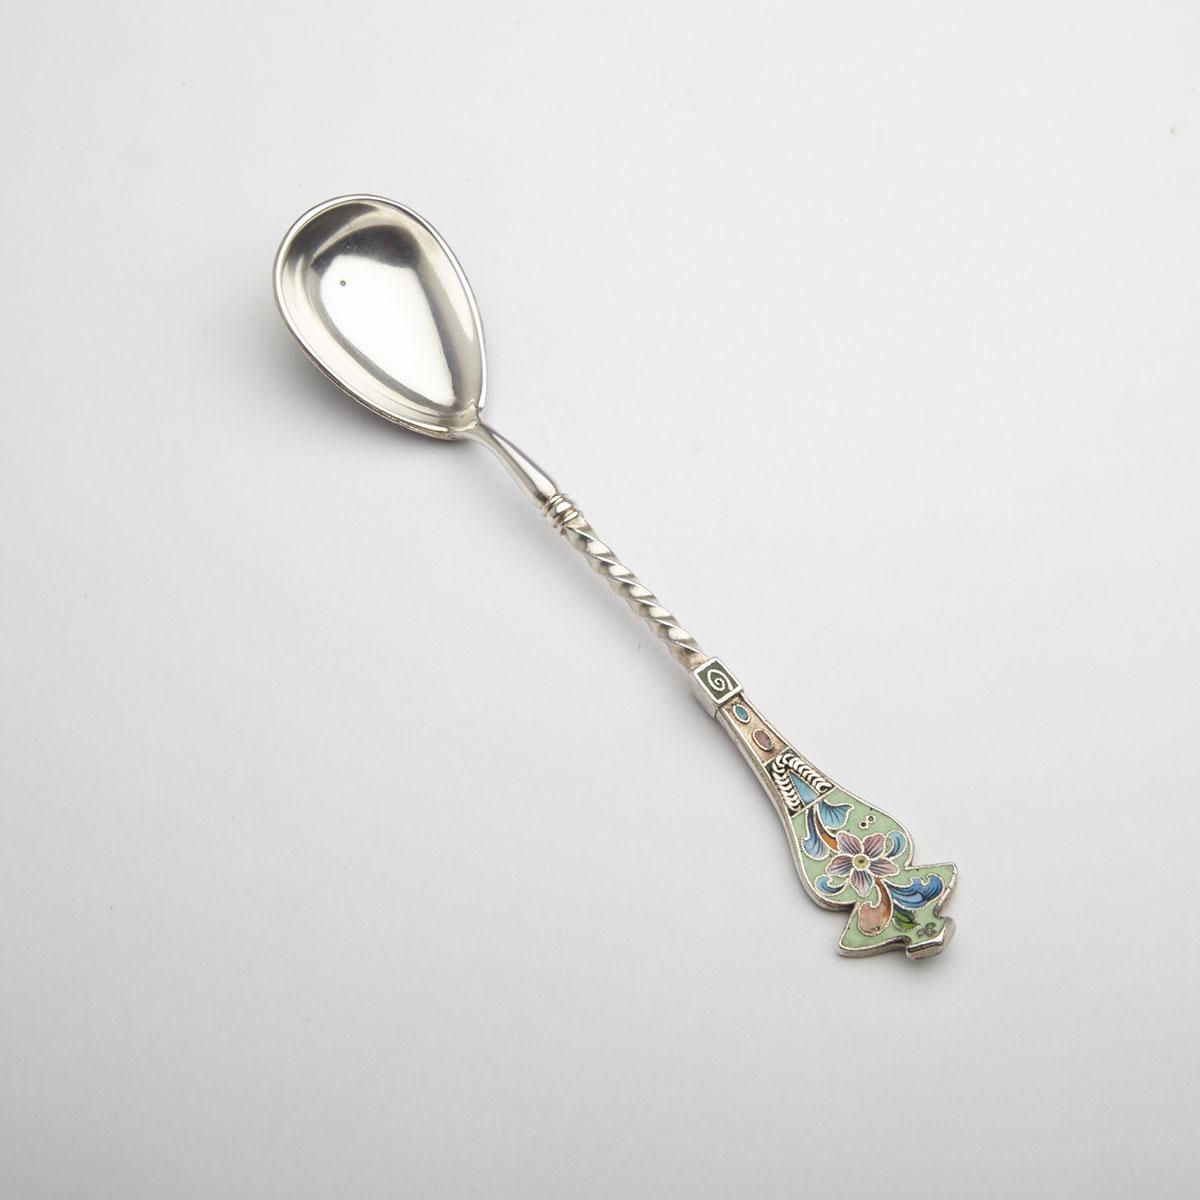 Russian Silver and Cloisonné Enamel Spoon, 6th Artel, Moscow, c.1908-17